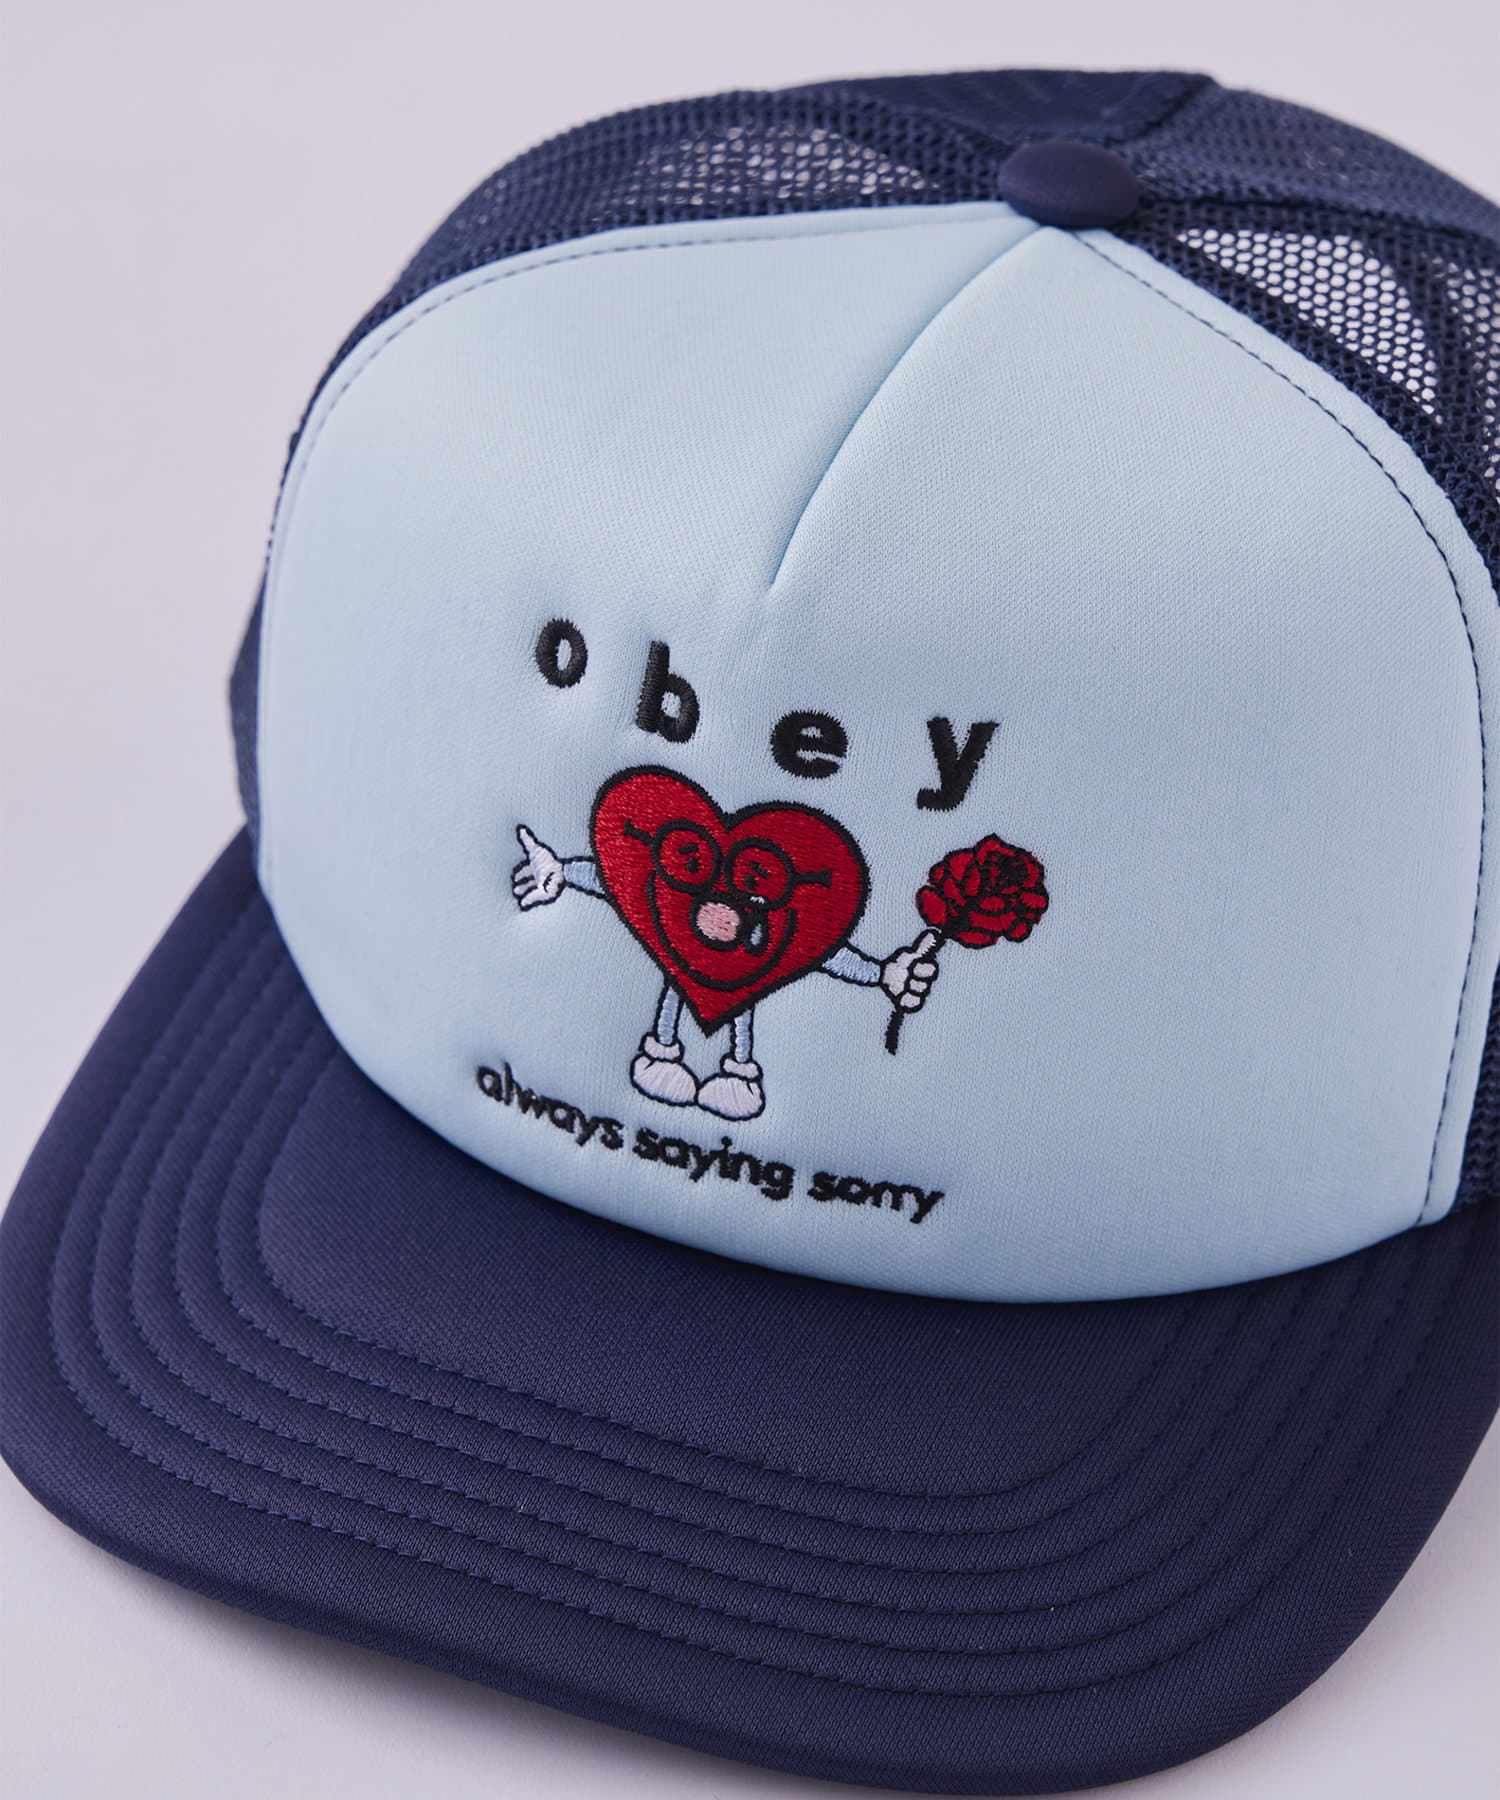 WHO’S WHO gallery(フーズフーギャラリー) OBEY ALWAYS TRUCKER